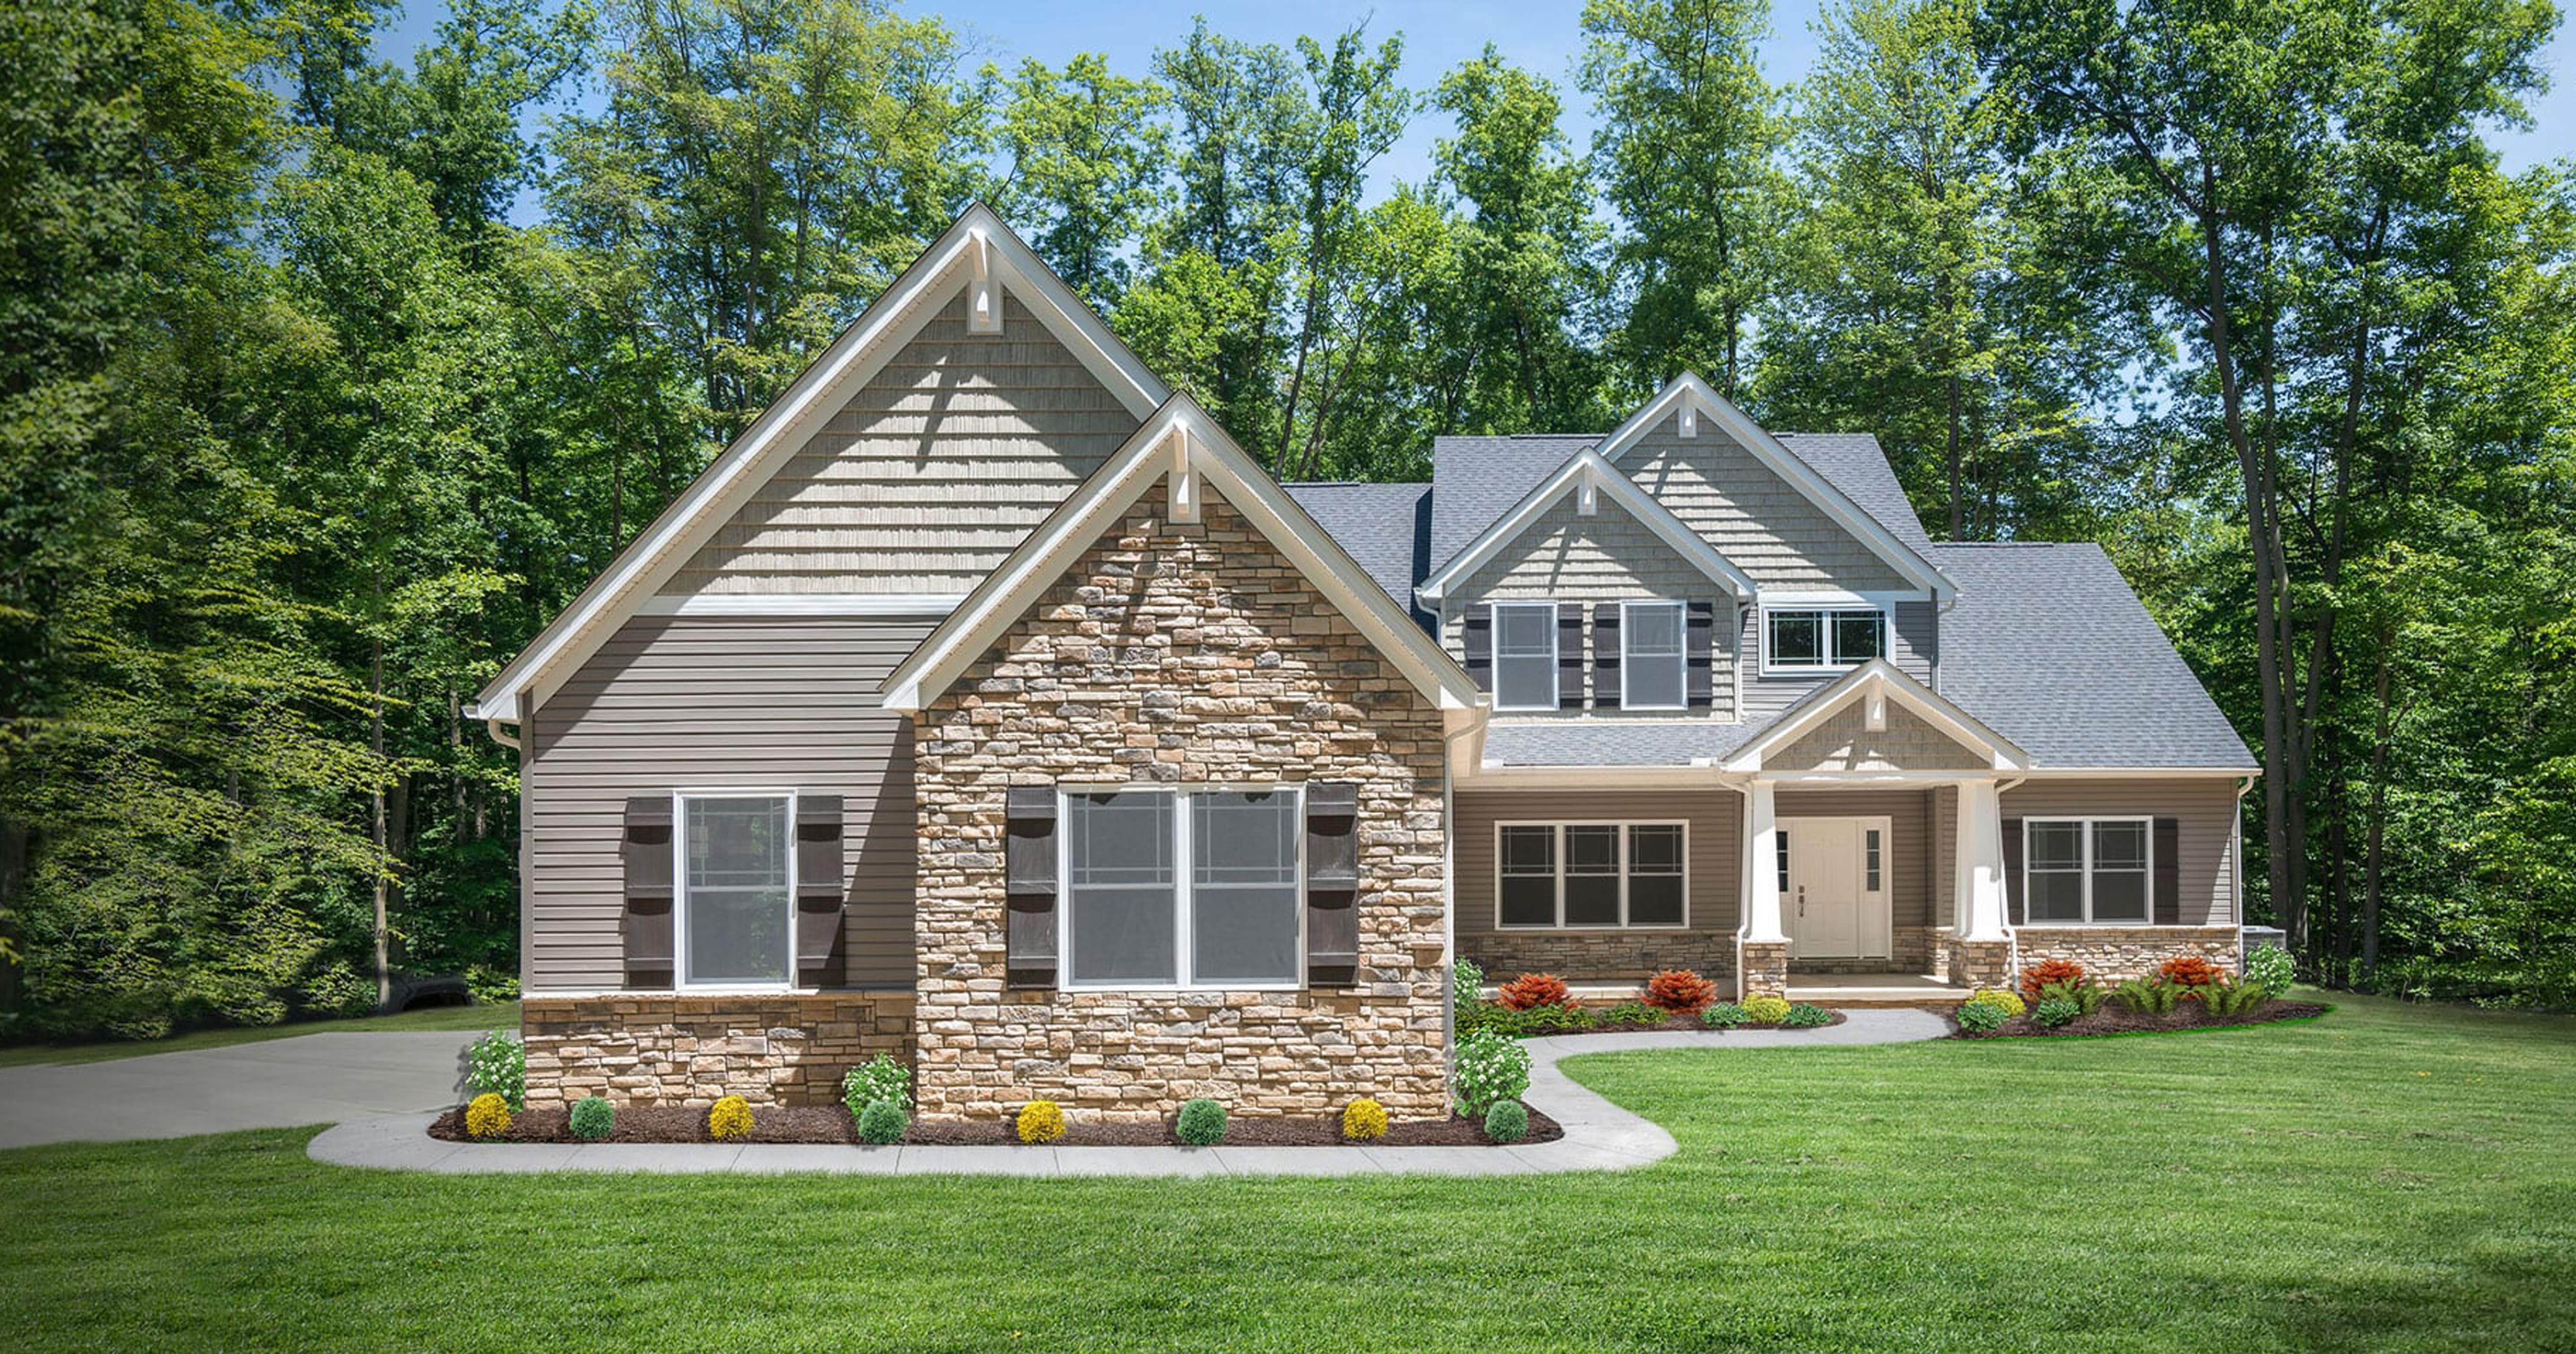 THE ADVANTAGES OF NEW HOME CONSTRUCTION